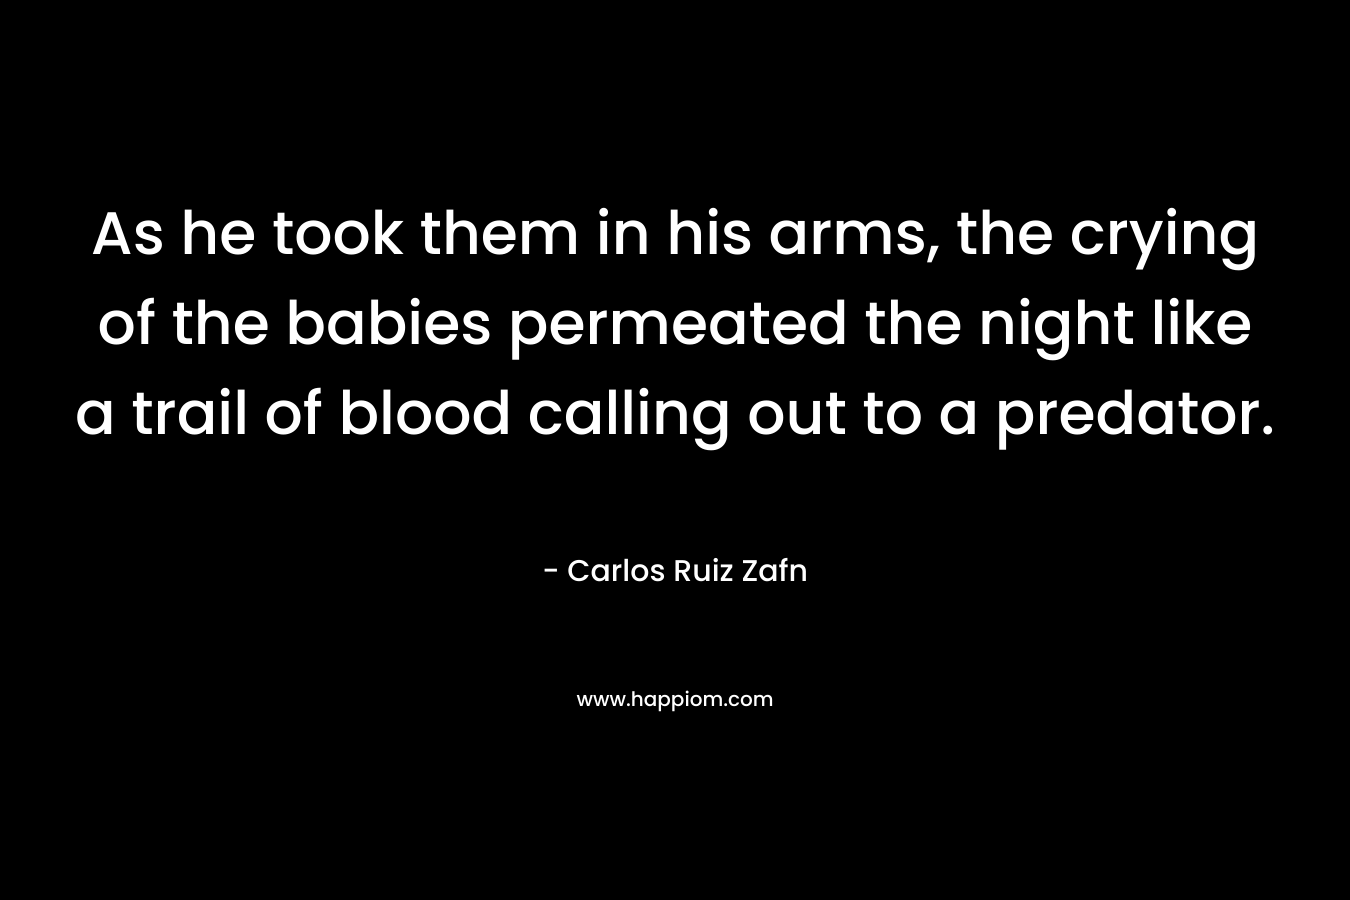 As he took them in his arms, the crying of the babies permeated the night like a trail of blood calling out to a predator. – Carlos Ruiz Zafn